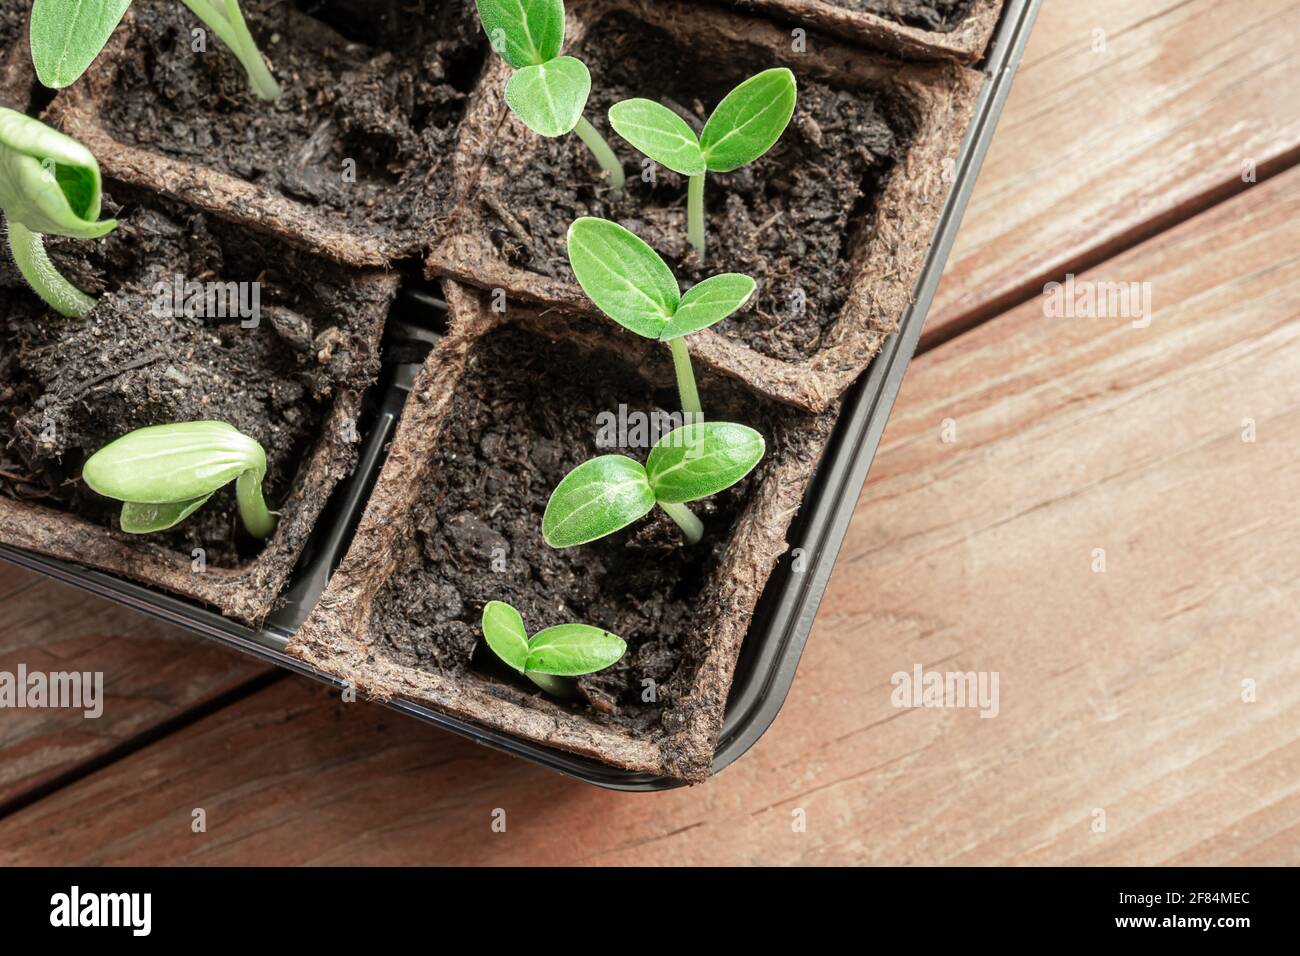 Cucumbers and zucchini seedlings in peat pots on the wooden surface, home gardening and connecting with nature concept, top view Stock Photo